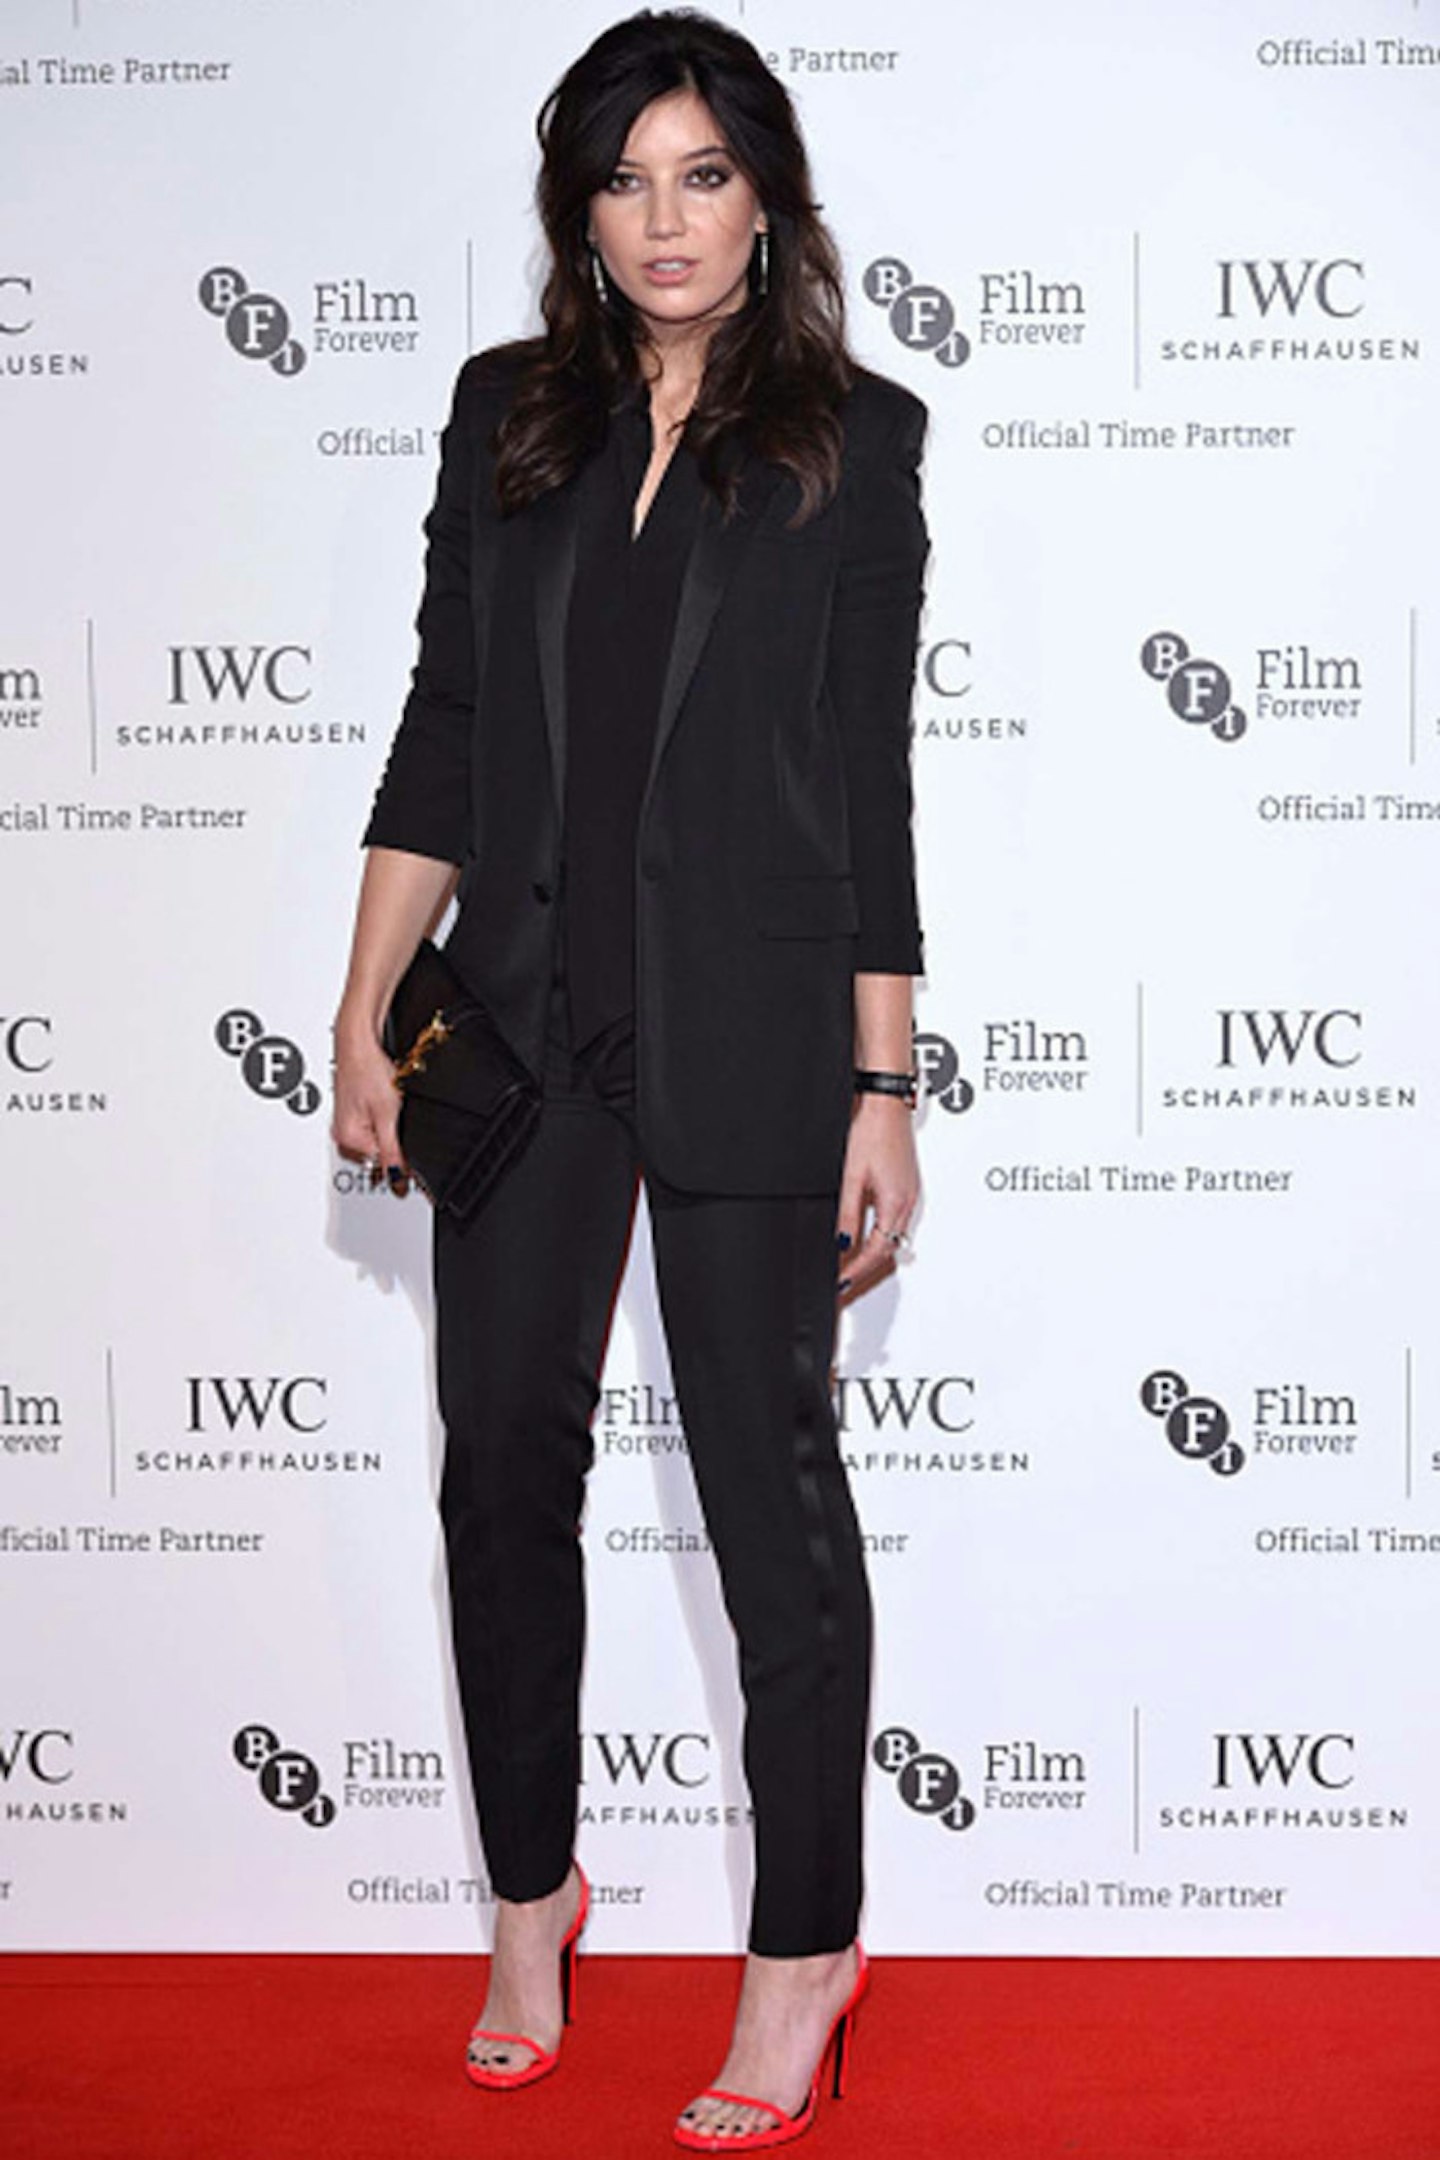 Daisy Lowe in Saint Laurent at the IWC Gala dinner in London - October 7, 2014